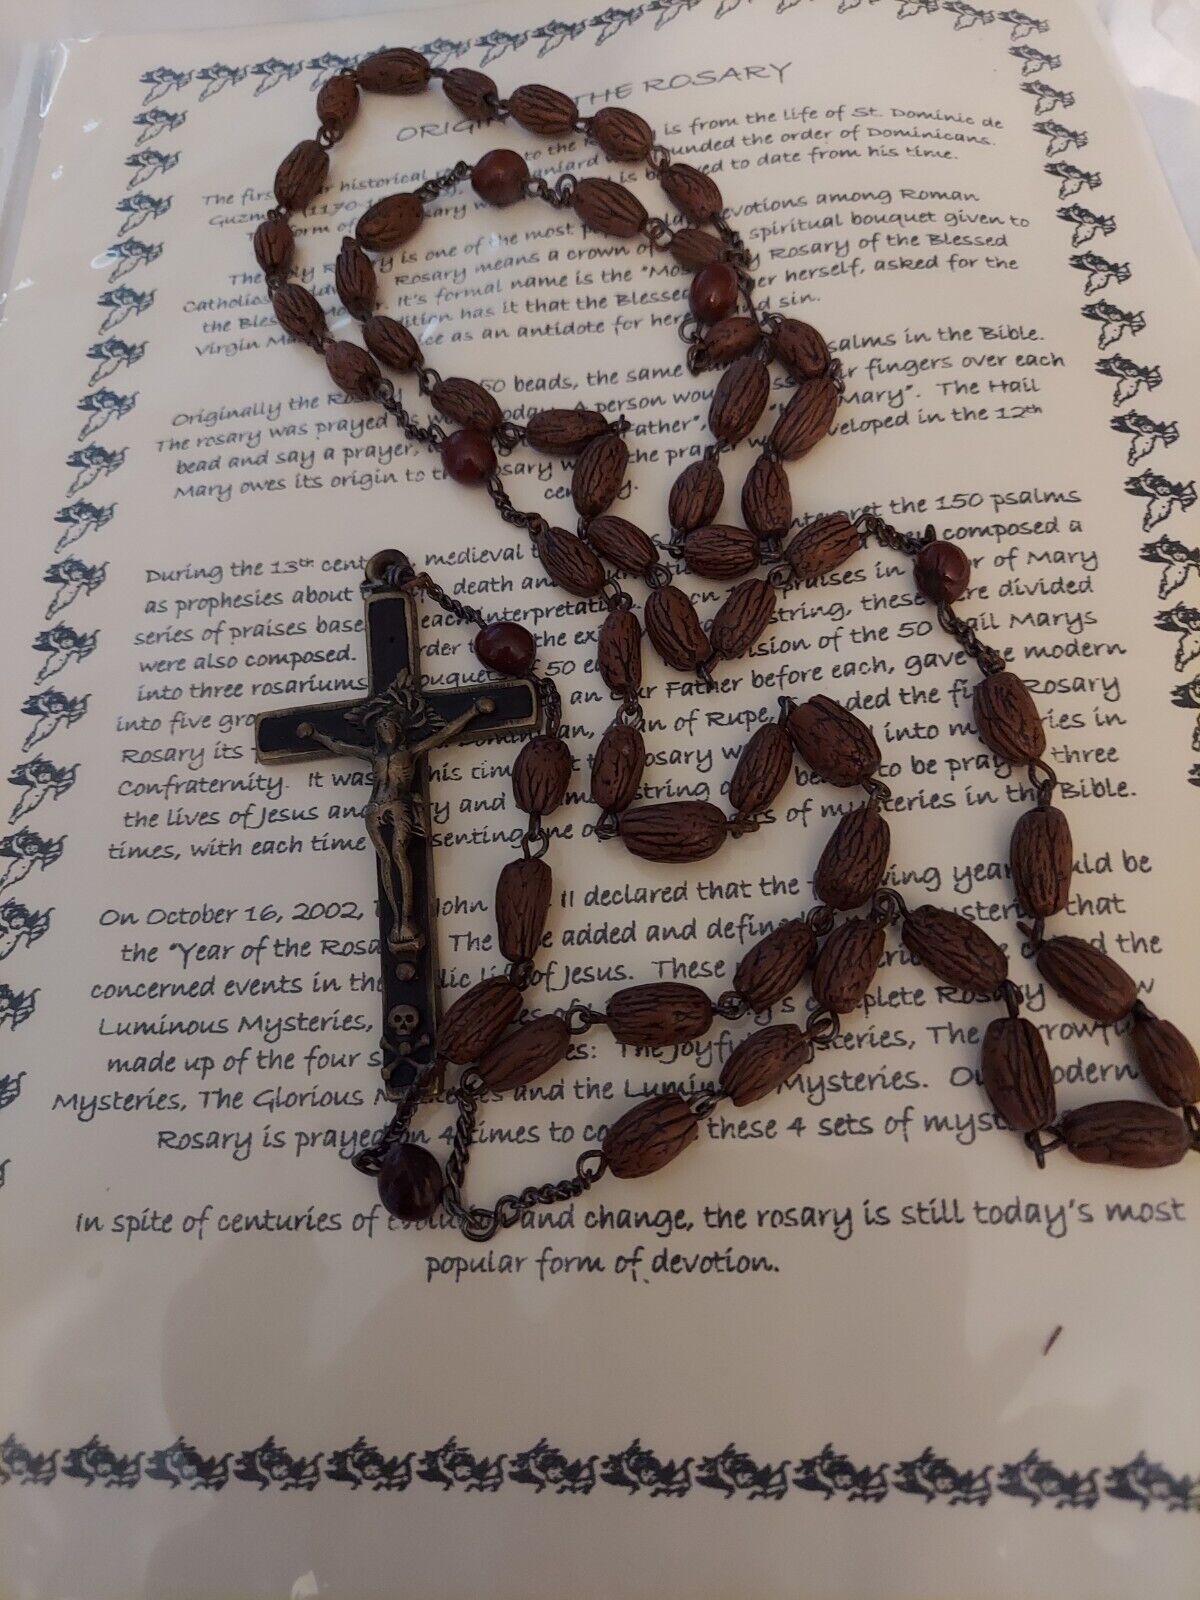 Museum Pre Civil War Rosary Found In Shipwreck Authentic Family Heirloom 